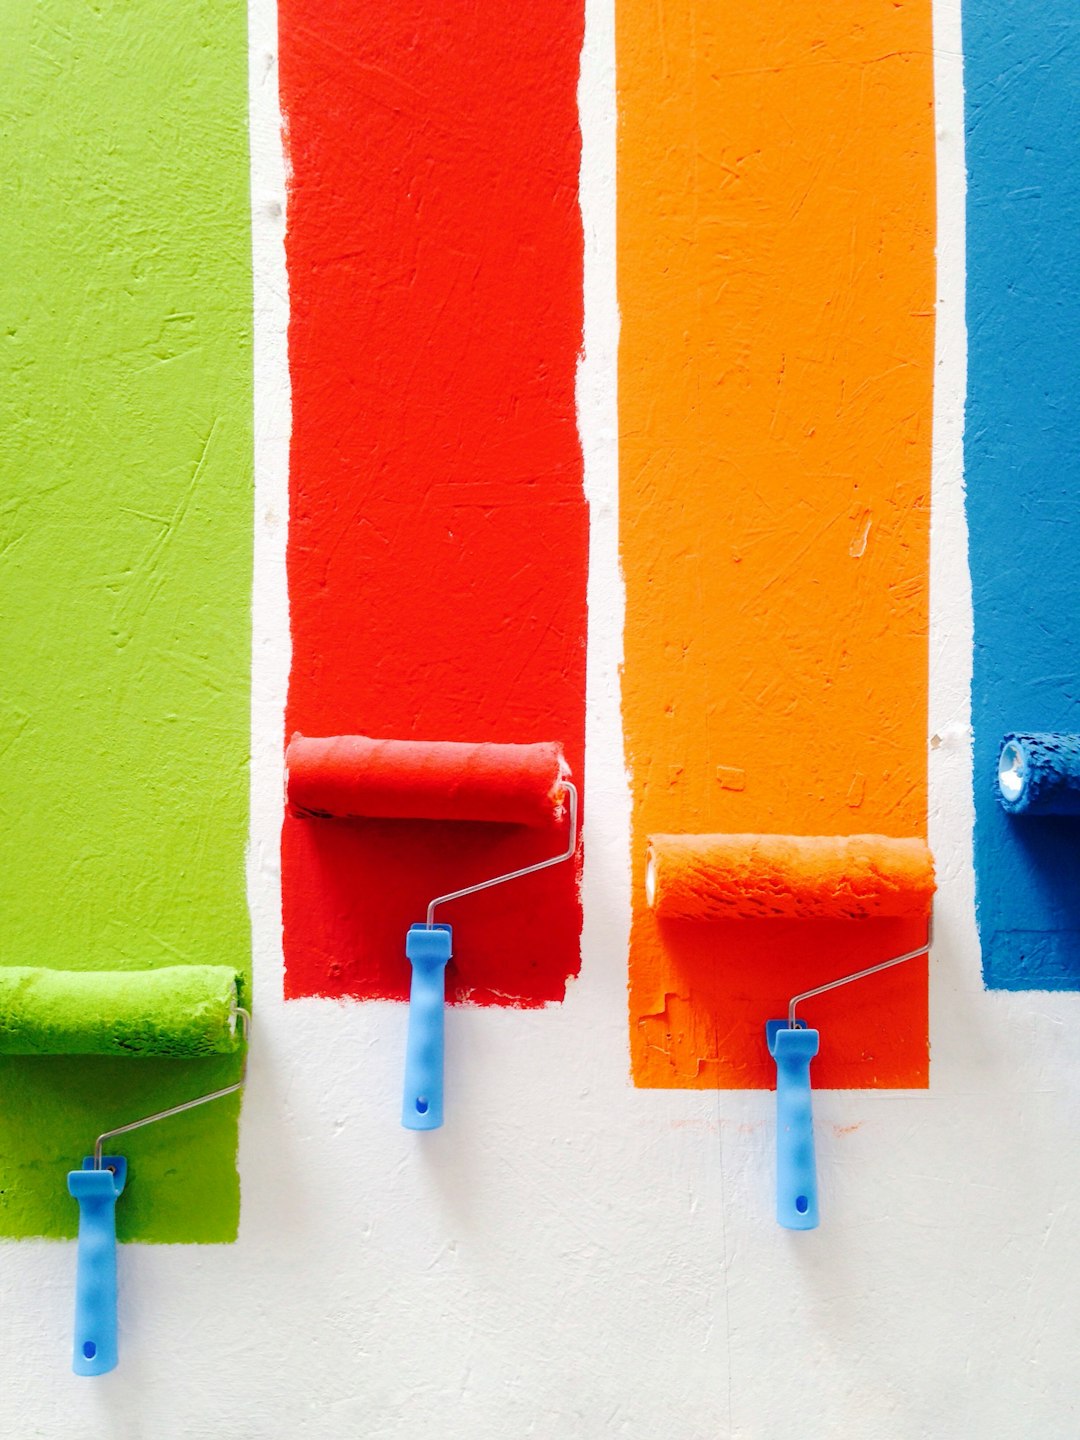 7 Key Advantages of Hiring Professional Painters to Paint a Home